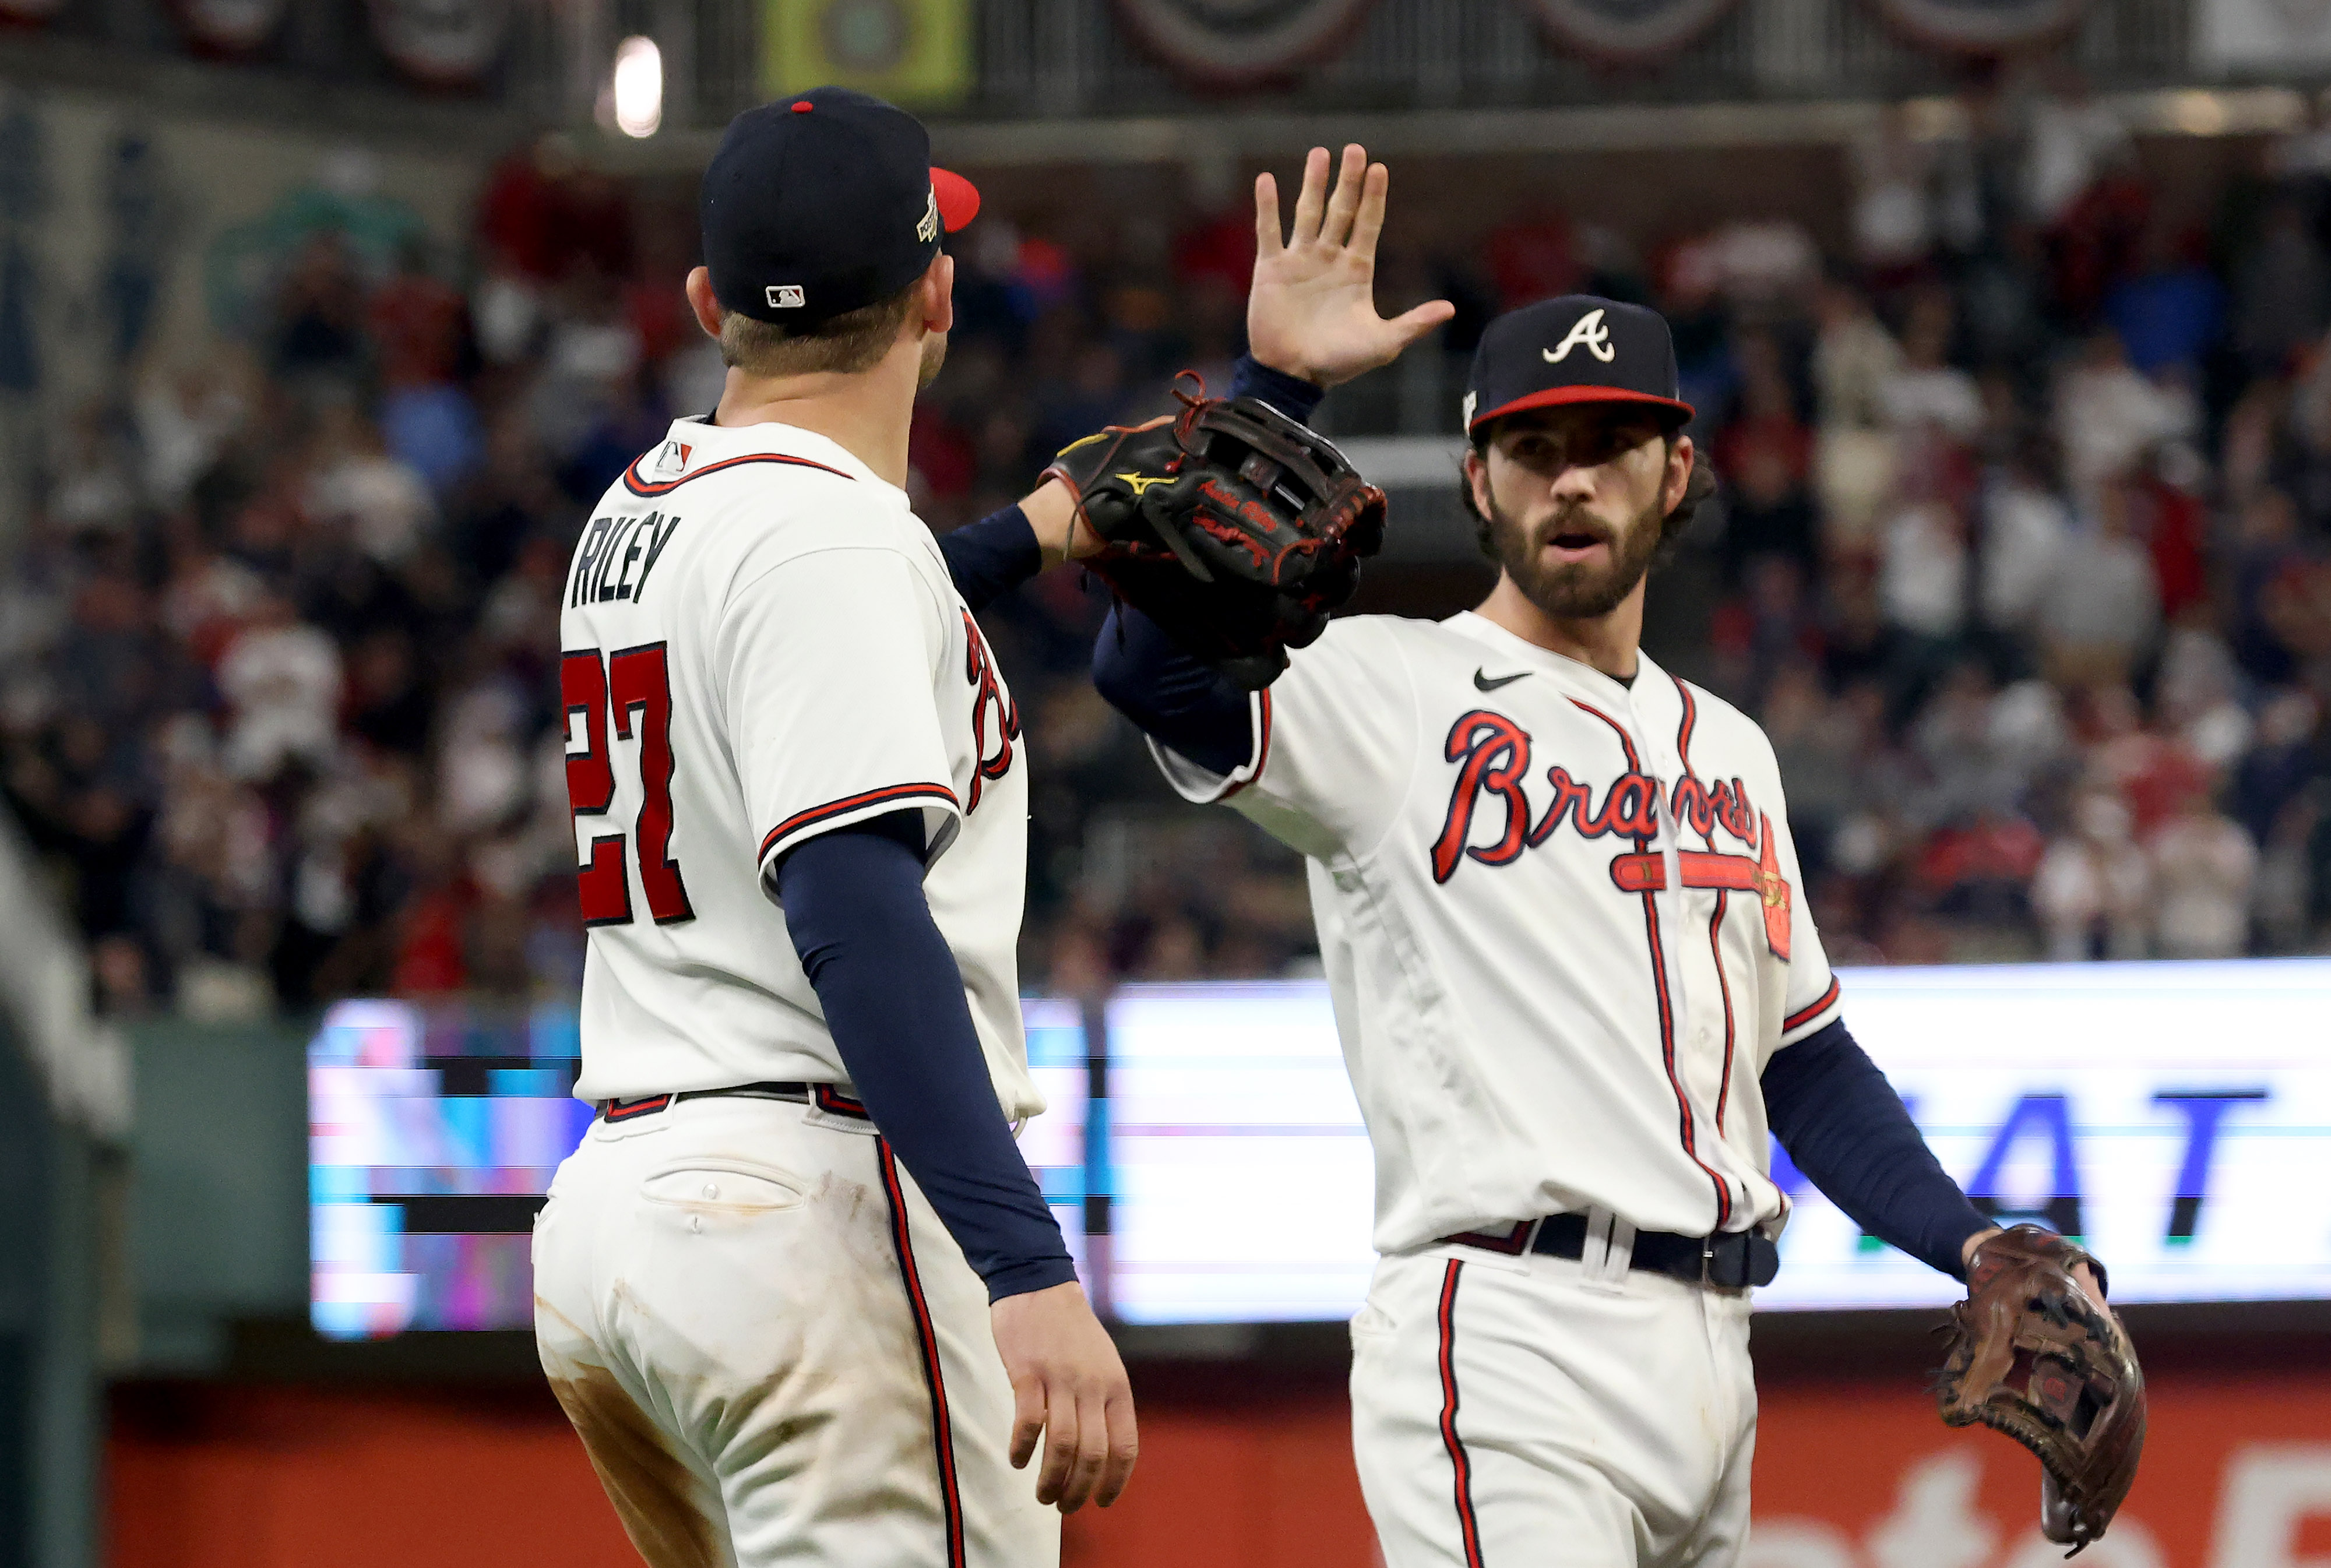 Braves shortstop Dansby Swanson excited to be healthy for 2019 season 